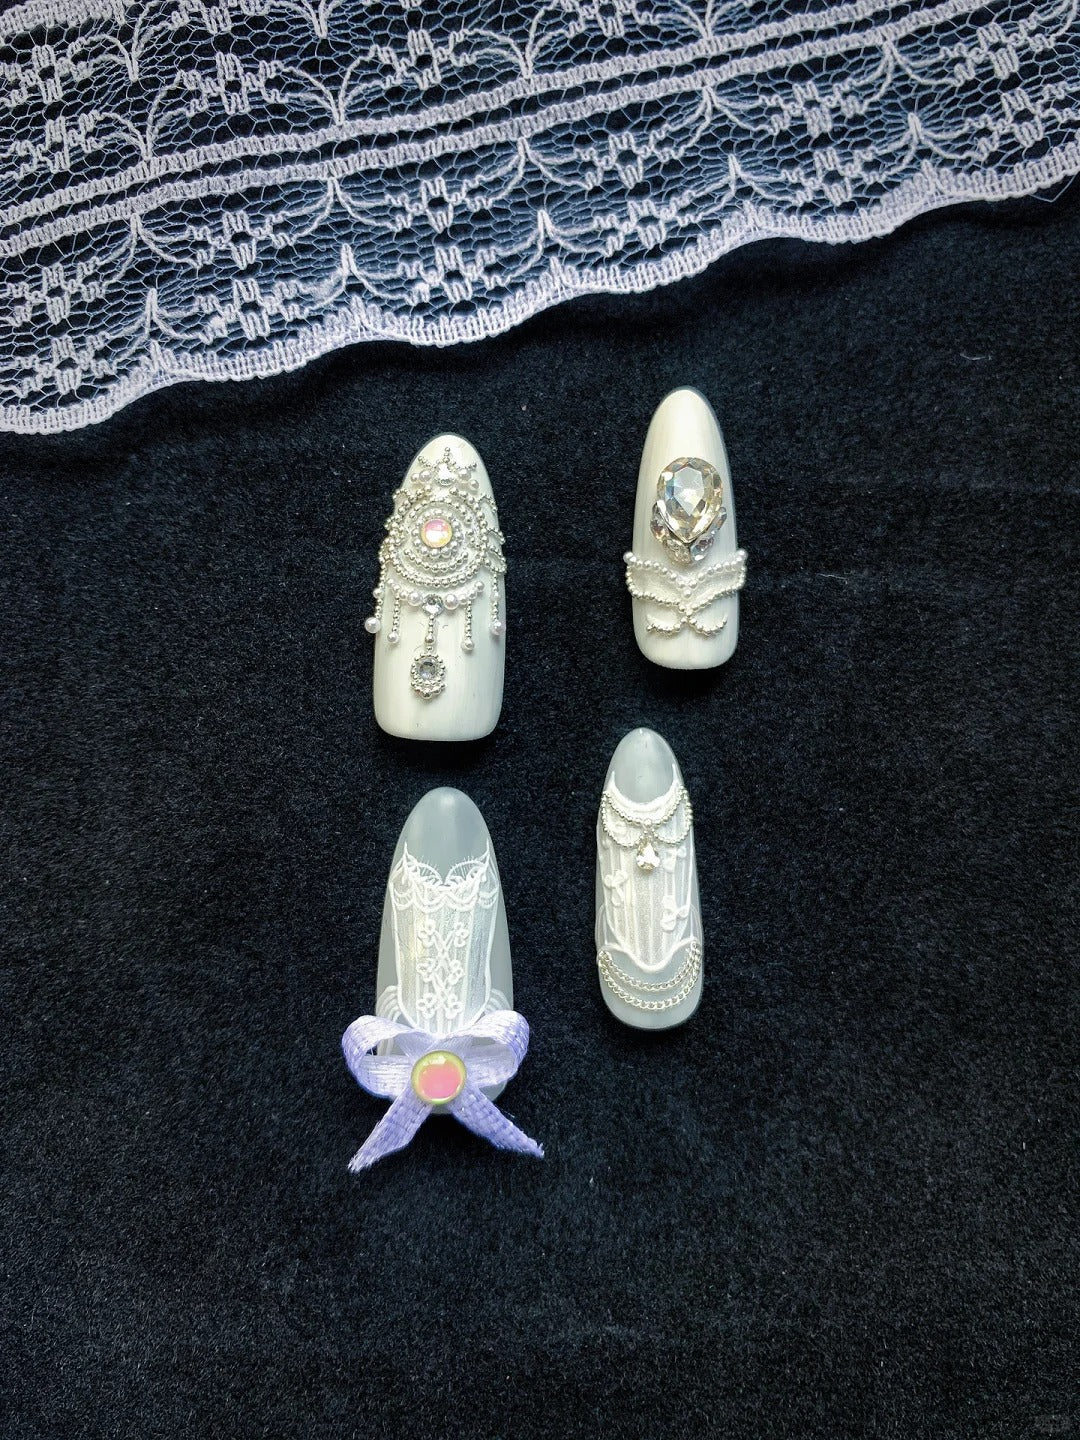 Castle princess - Handmade Press On Nails with Special Design  - Reusable Nails with Nail Tools - XS-XL